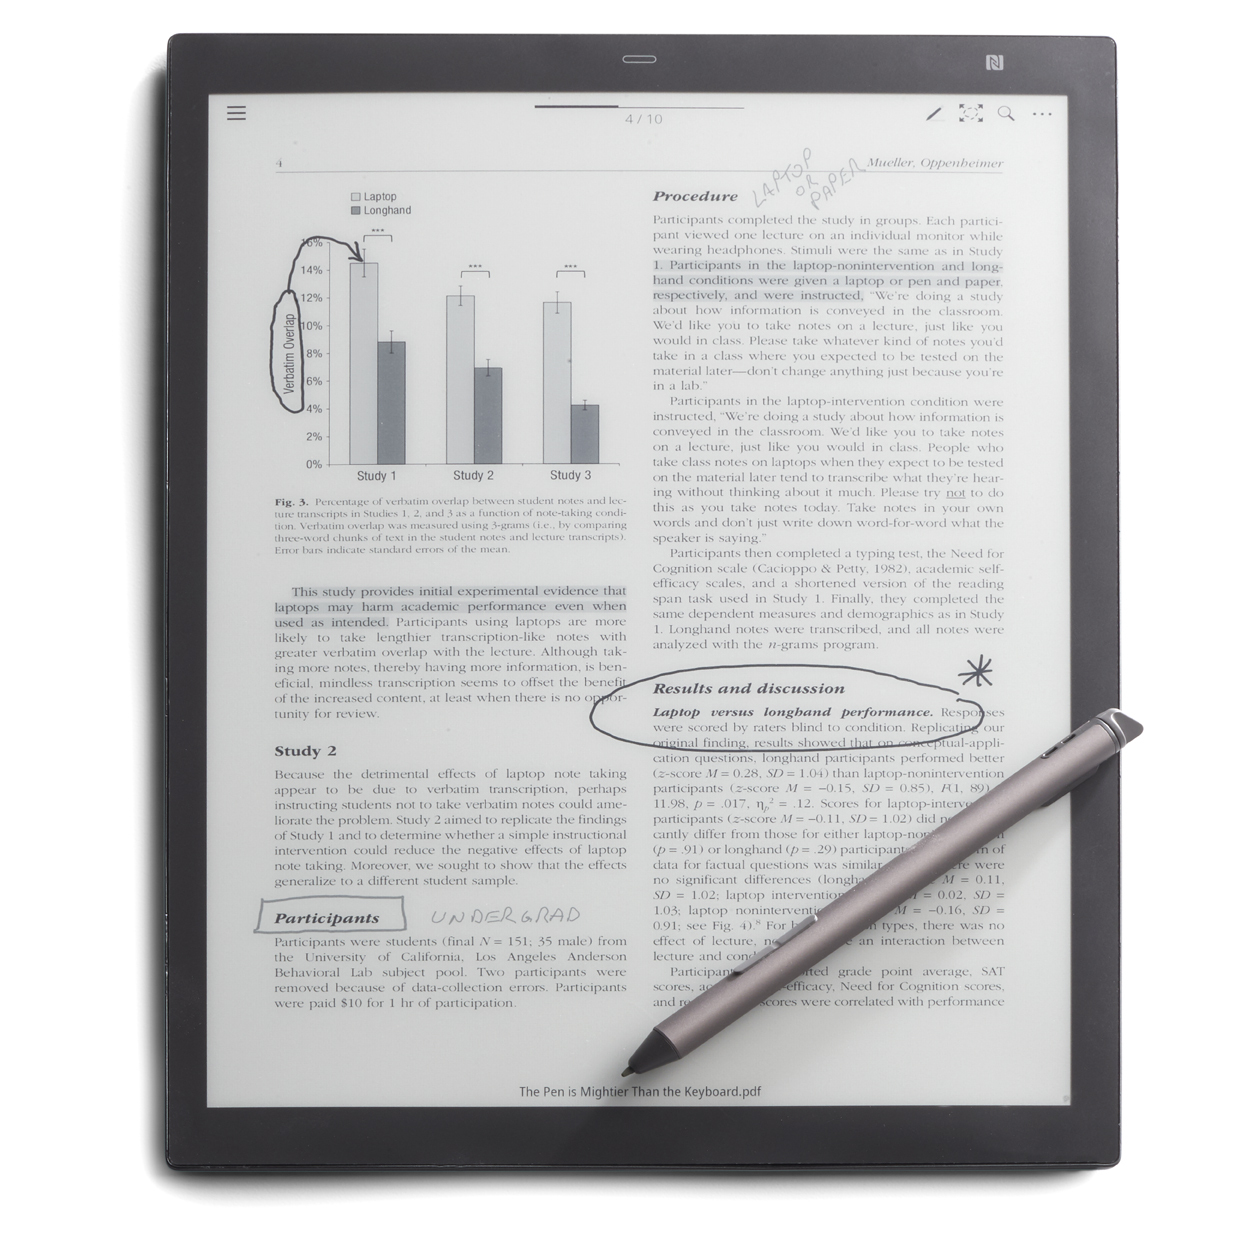 E Ink and Avalue unveil new Digital Paper tablet, a letter-sized device  with an electronic paper display -  News